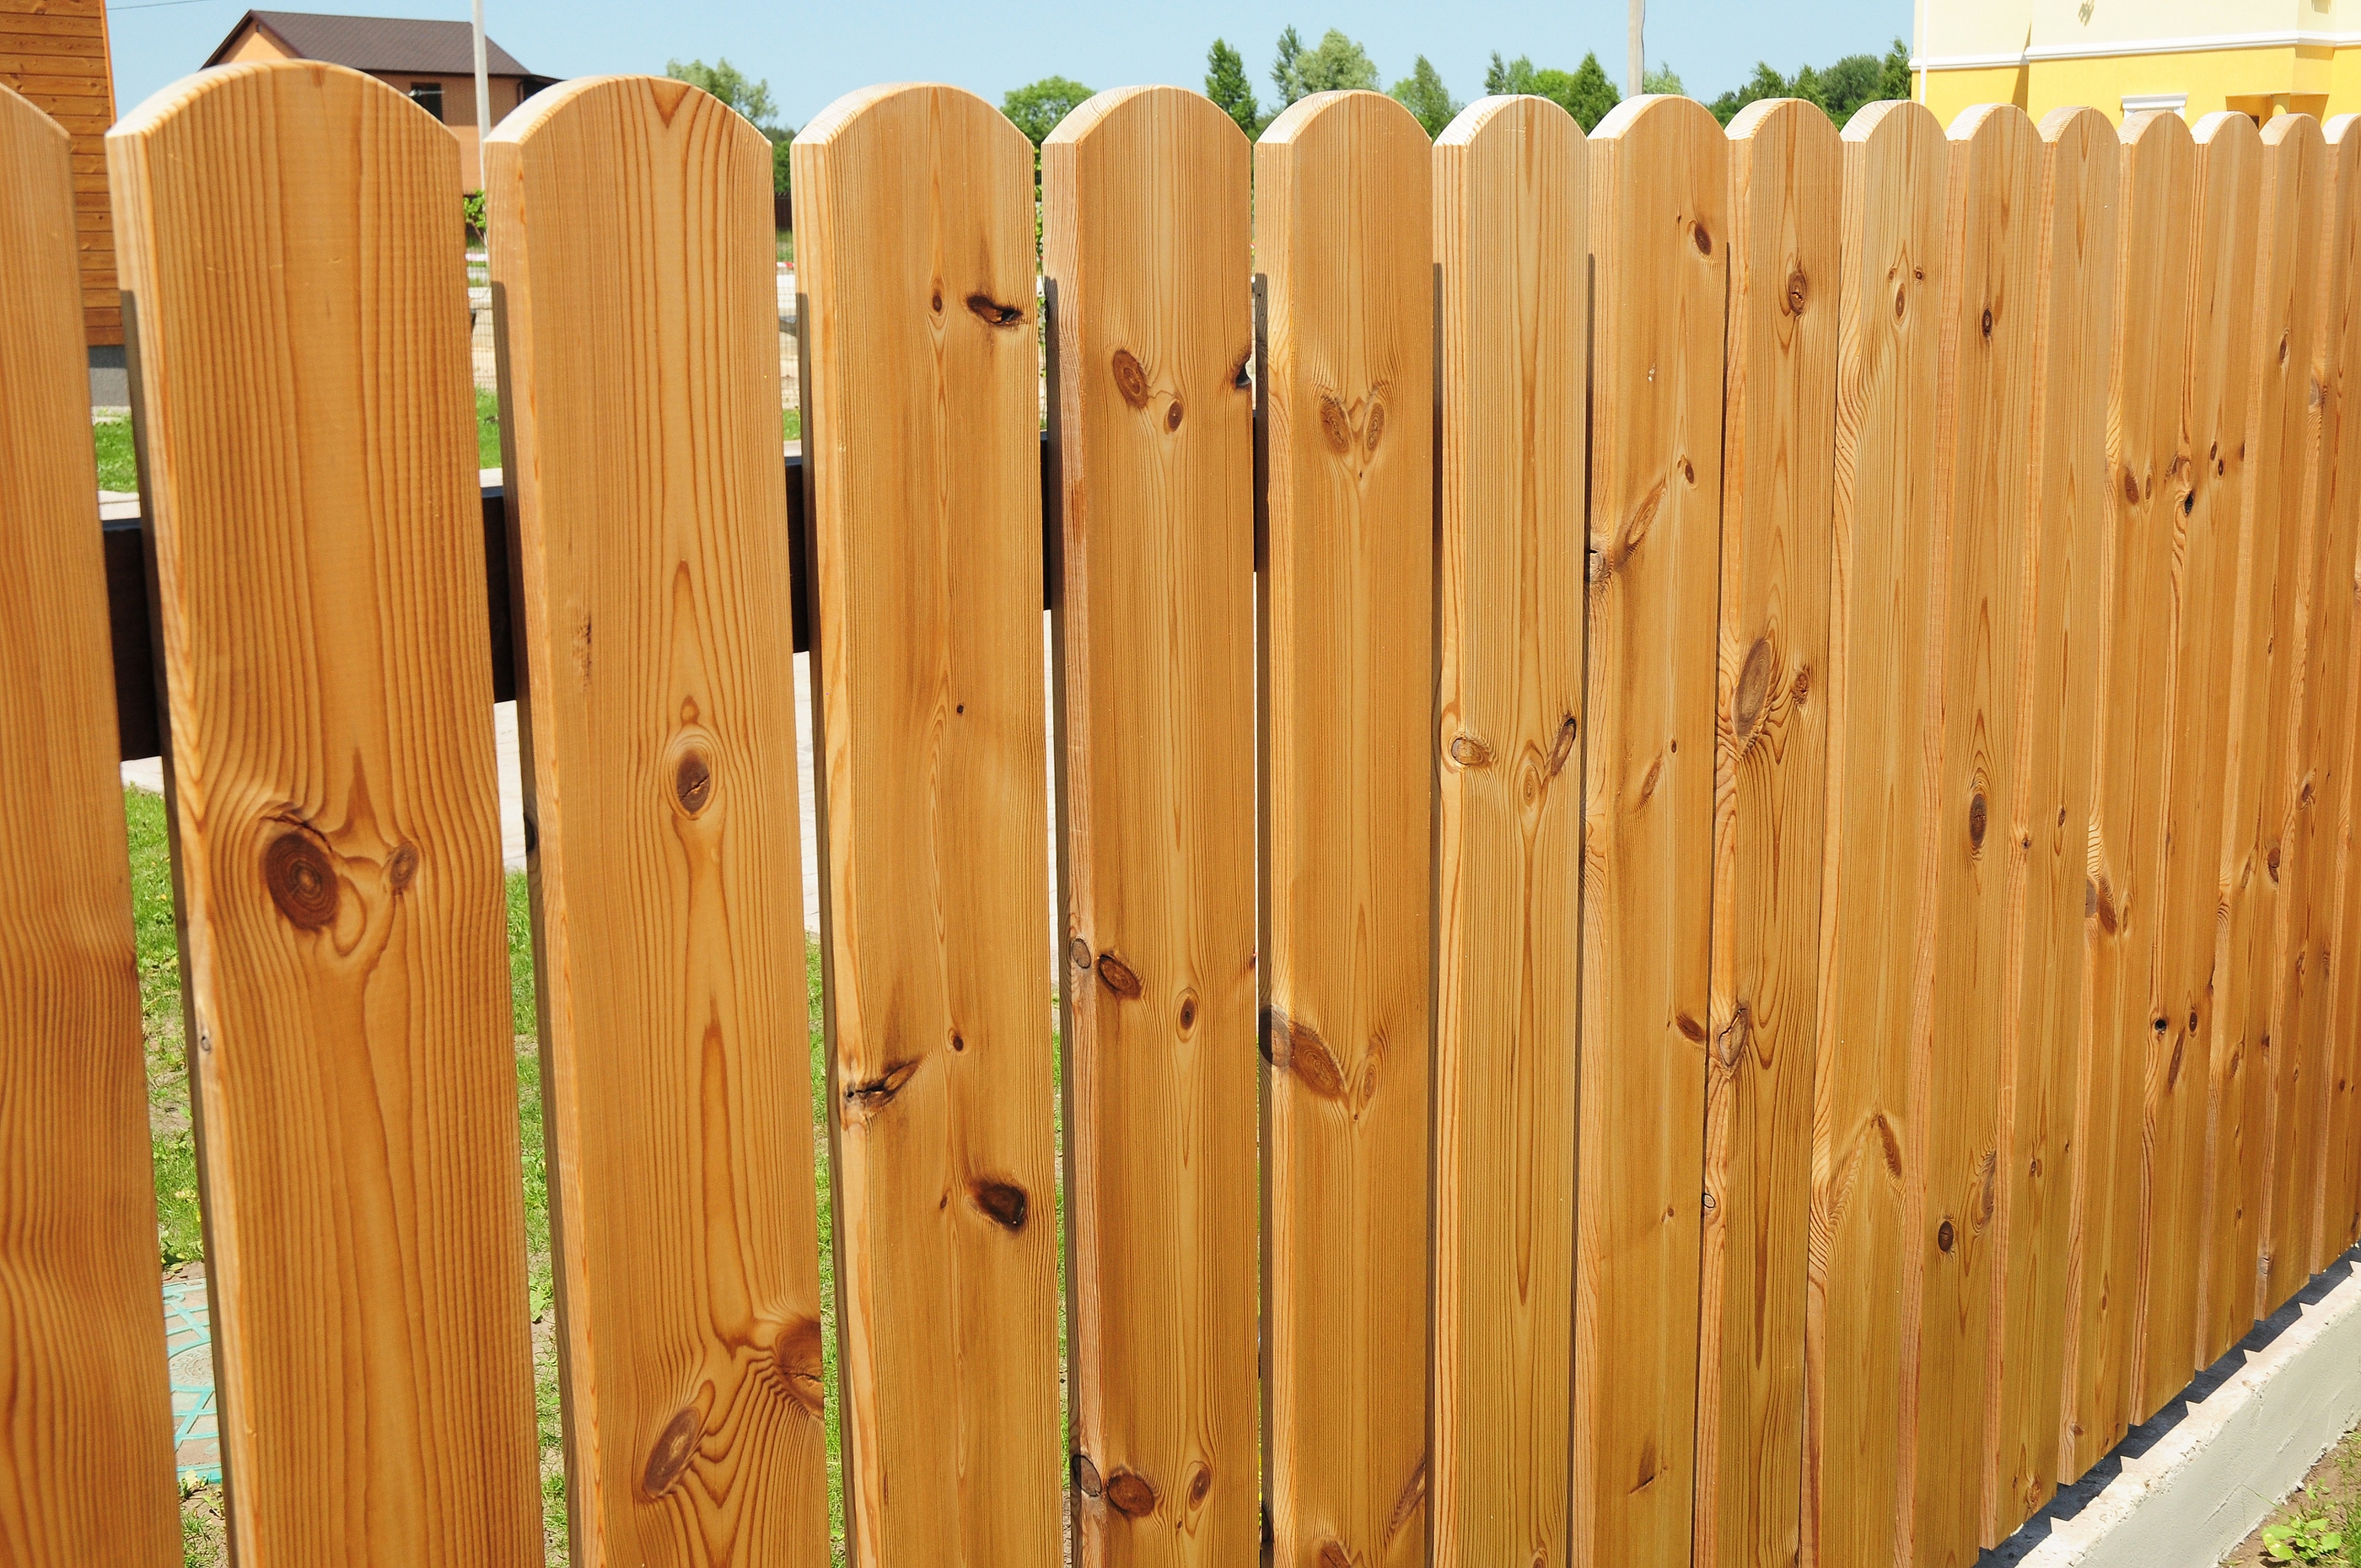 Getting Started With Your Fence Installation: Know Your HOA Rules